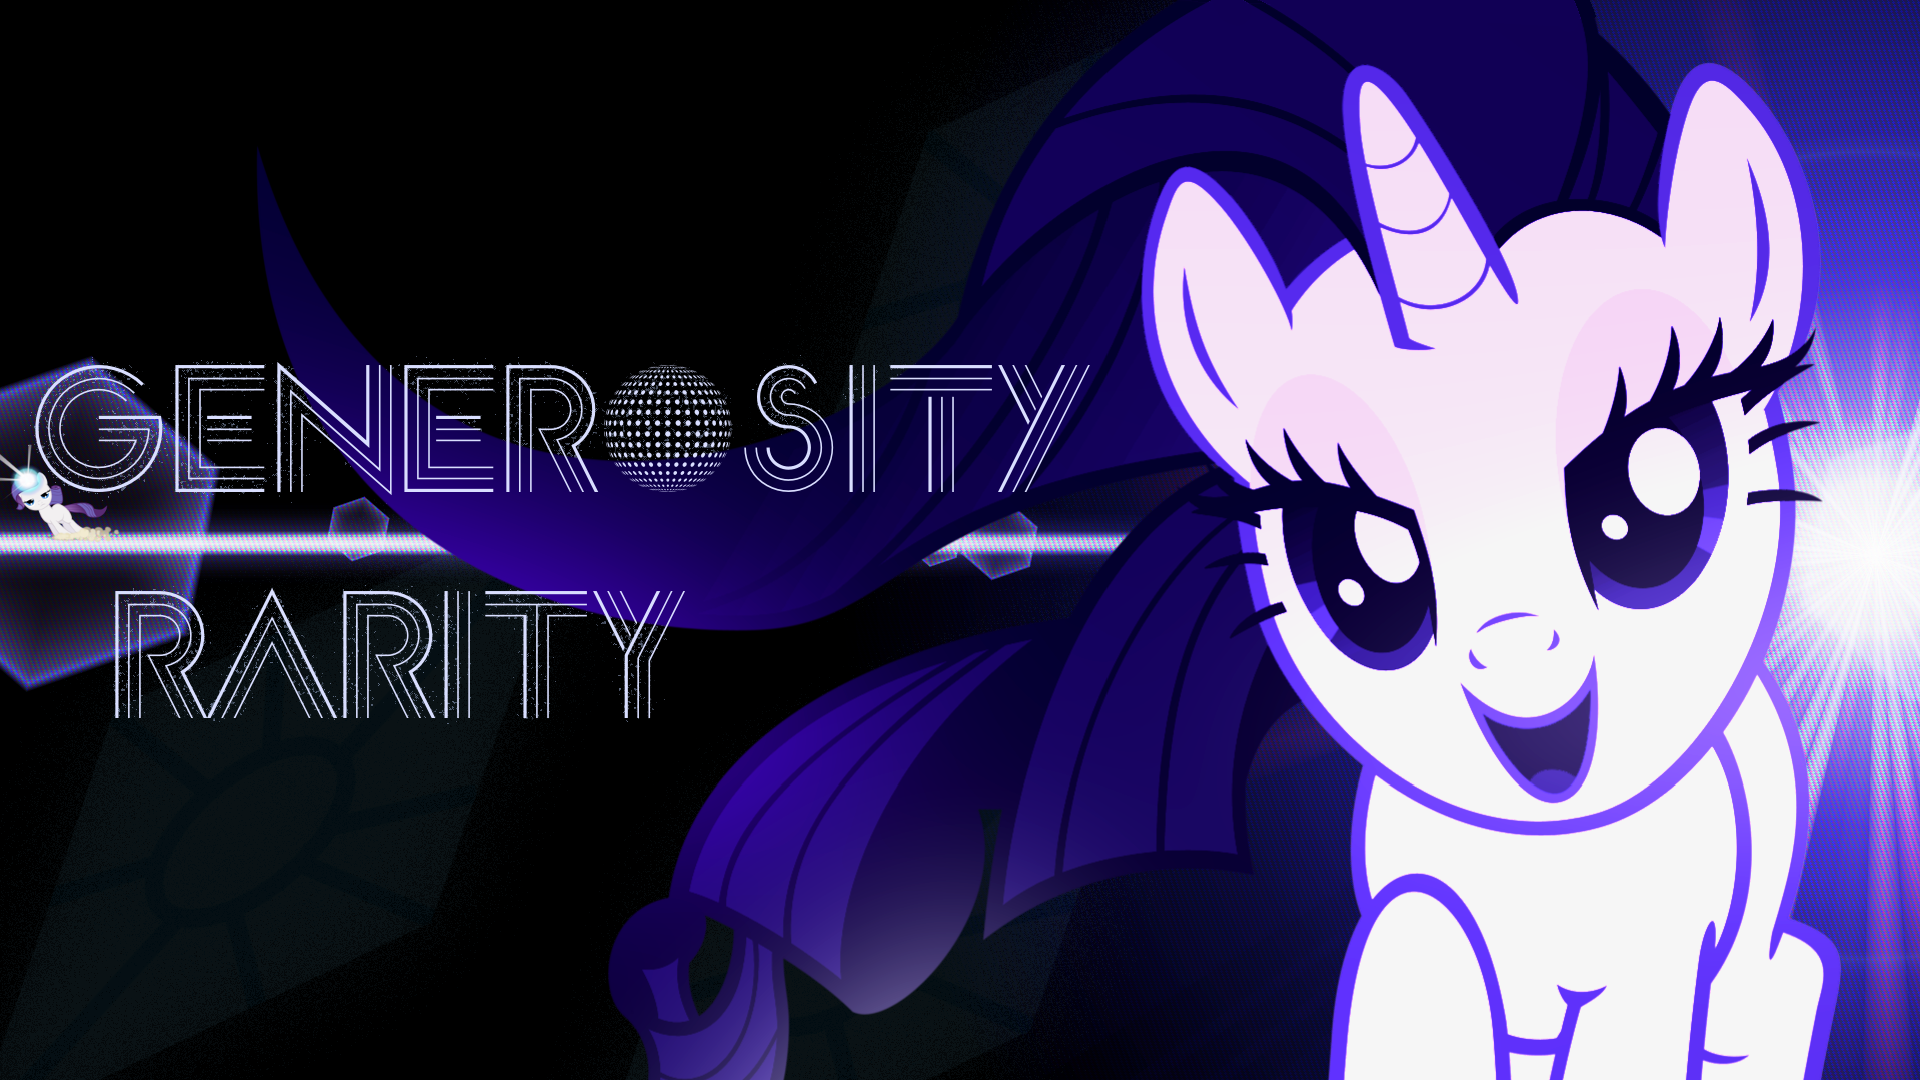 Shiny-shiny pretty lights wallpaper pack. by BlackGryph0n, Clueless313 and Stabzor